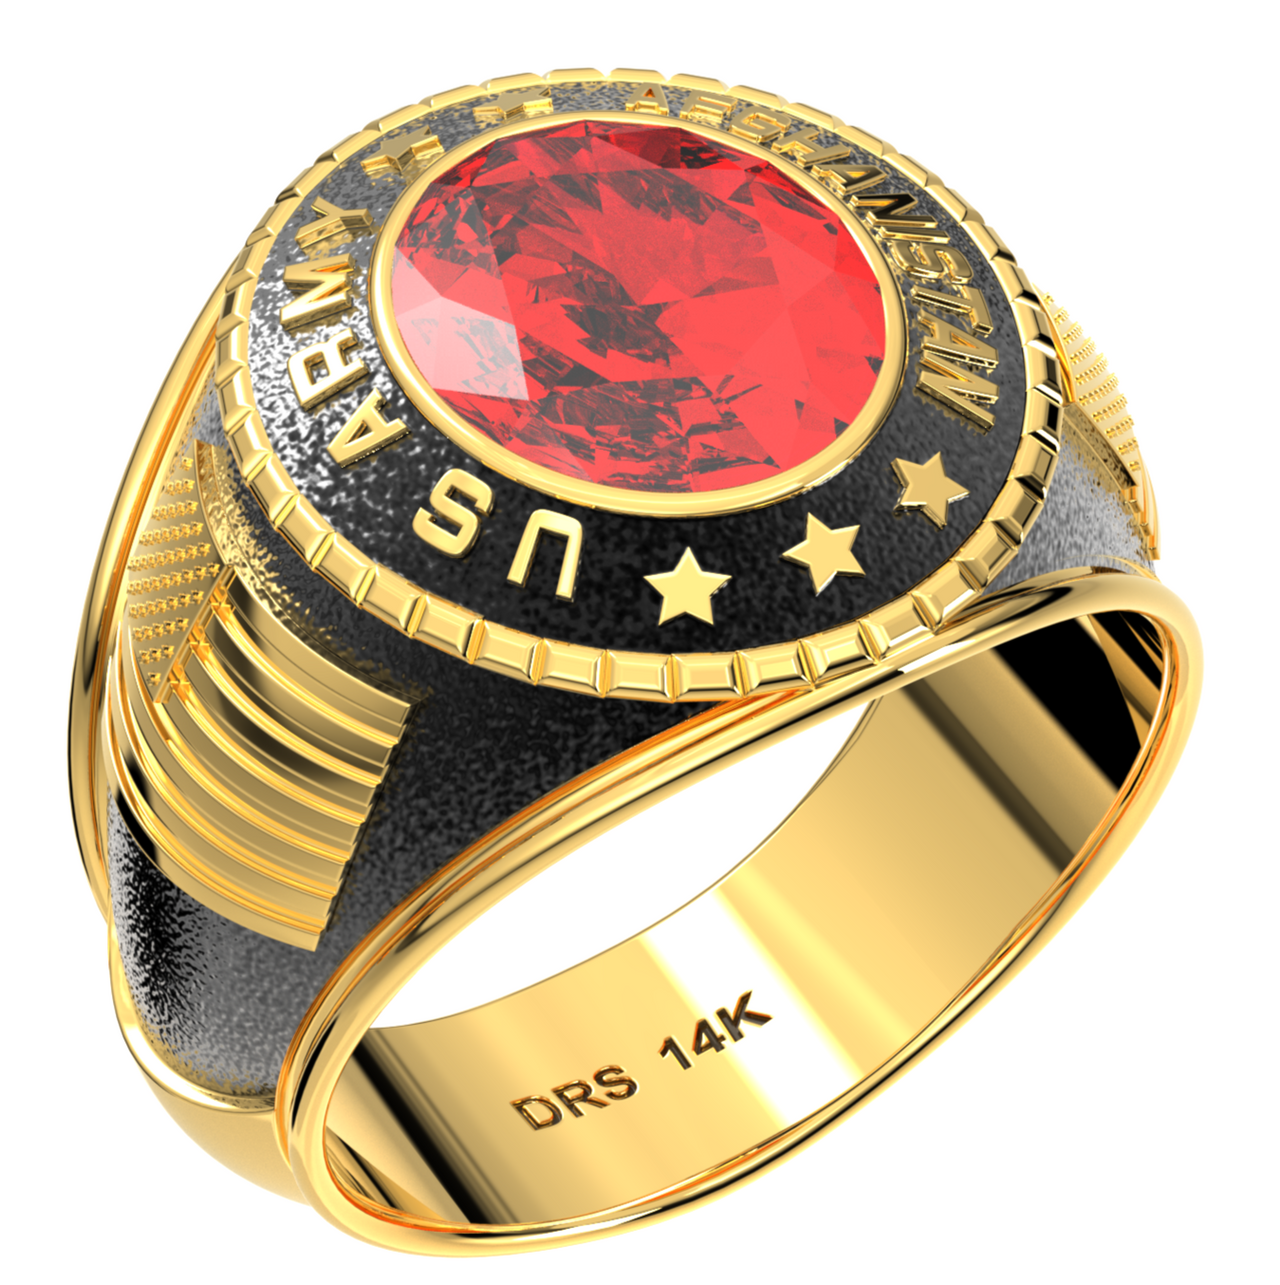 Customizable Afghanistan  Men's 10k or 14k Yellow or White Gold US Army Military Solid Back Ring